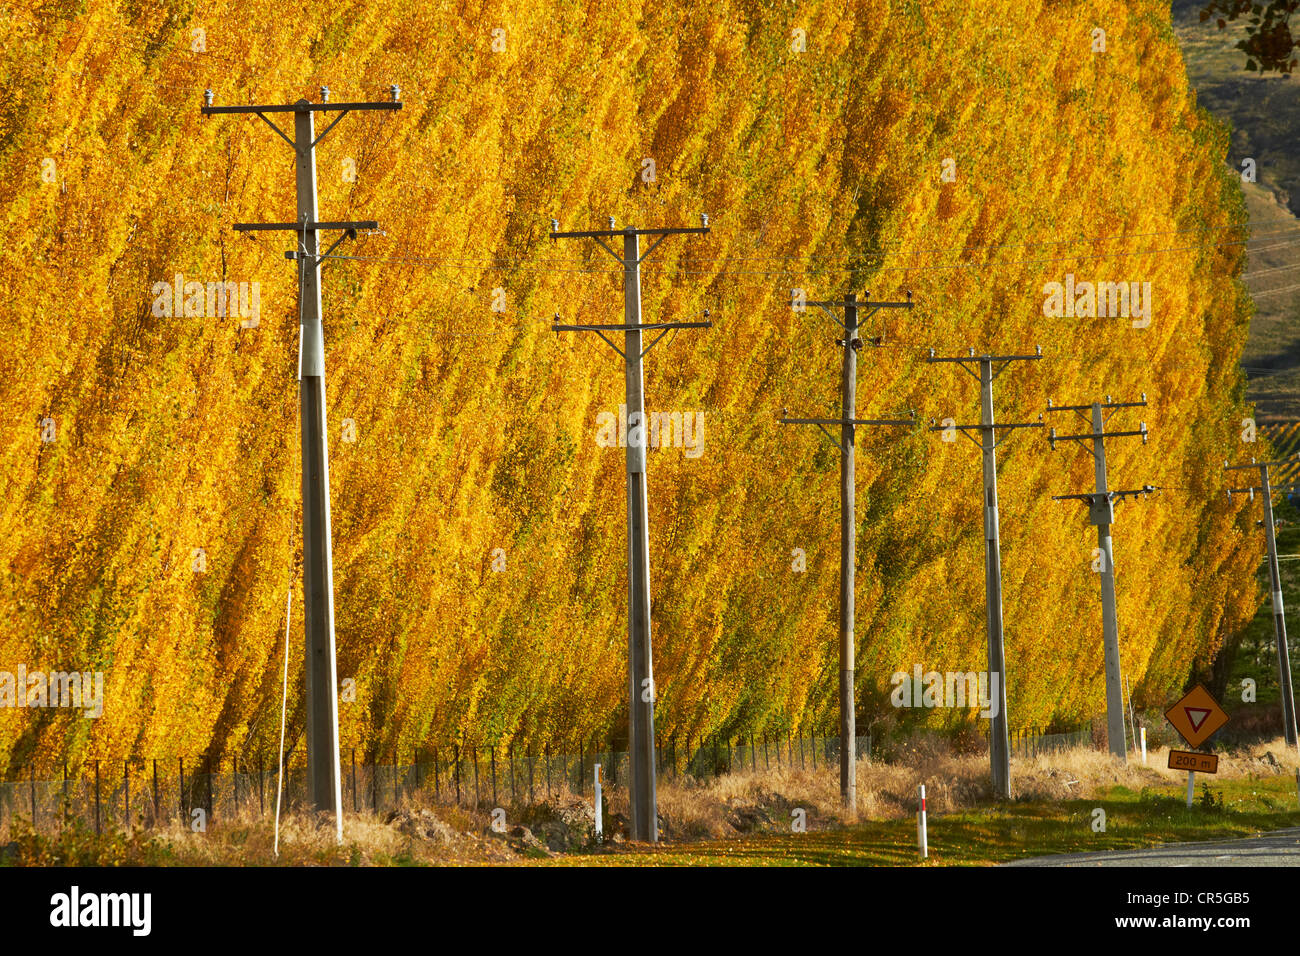 Power poles and poplar trees in autumn, Ripponvale, near Cromwell, Central Otago, South Island, New Zealand Stock Photo